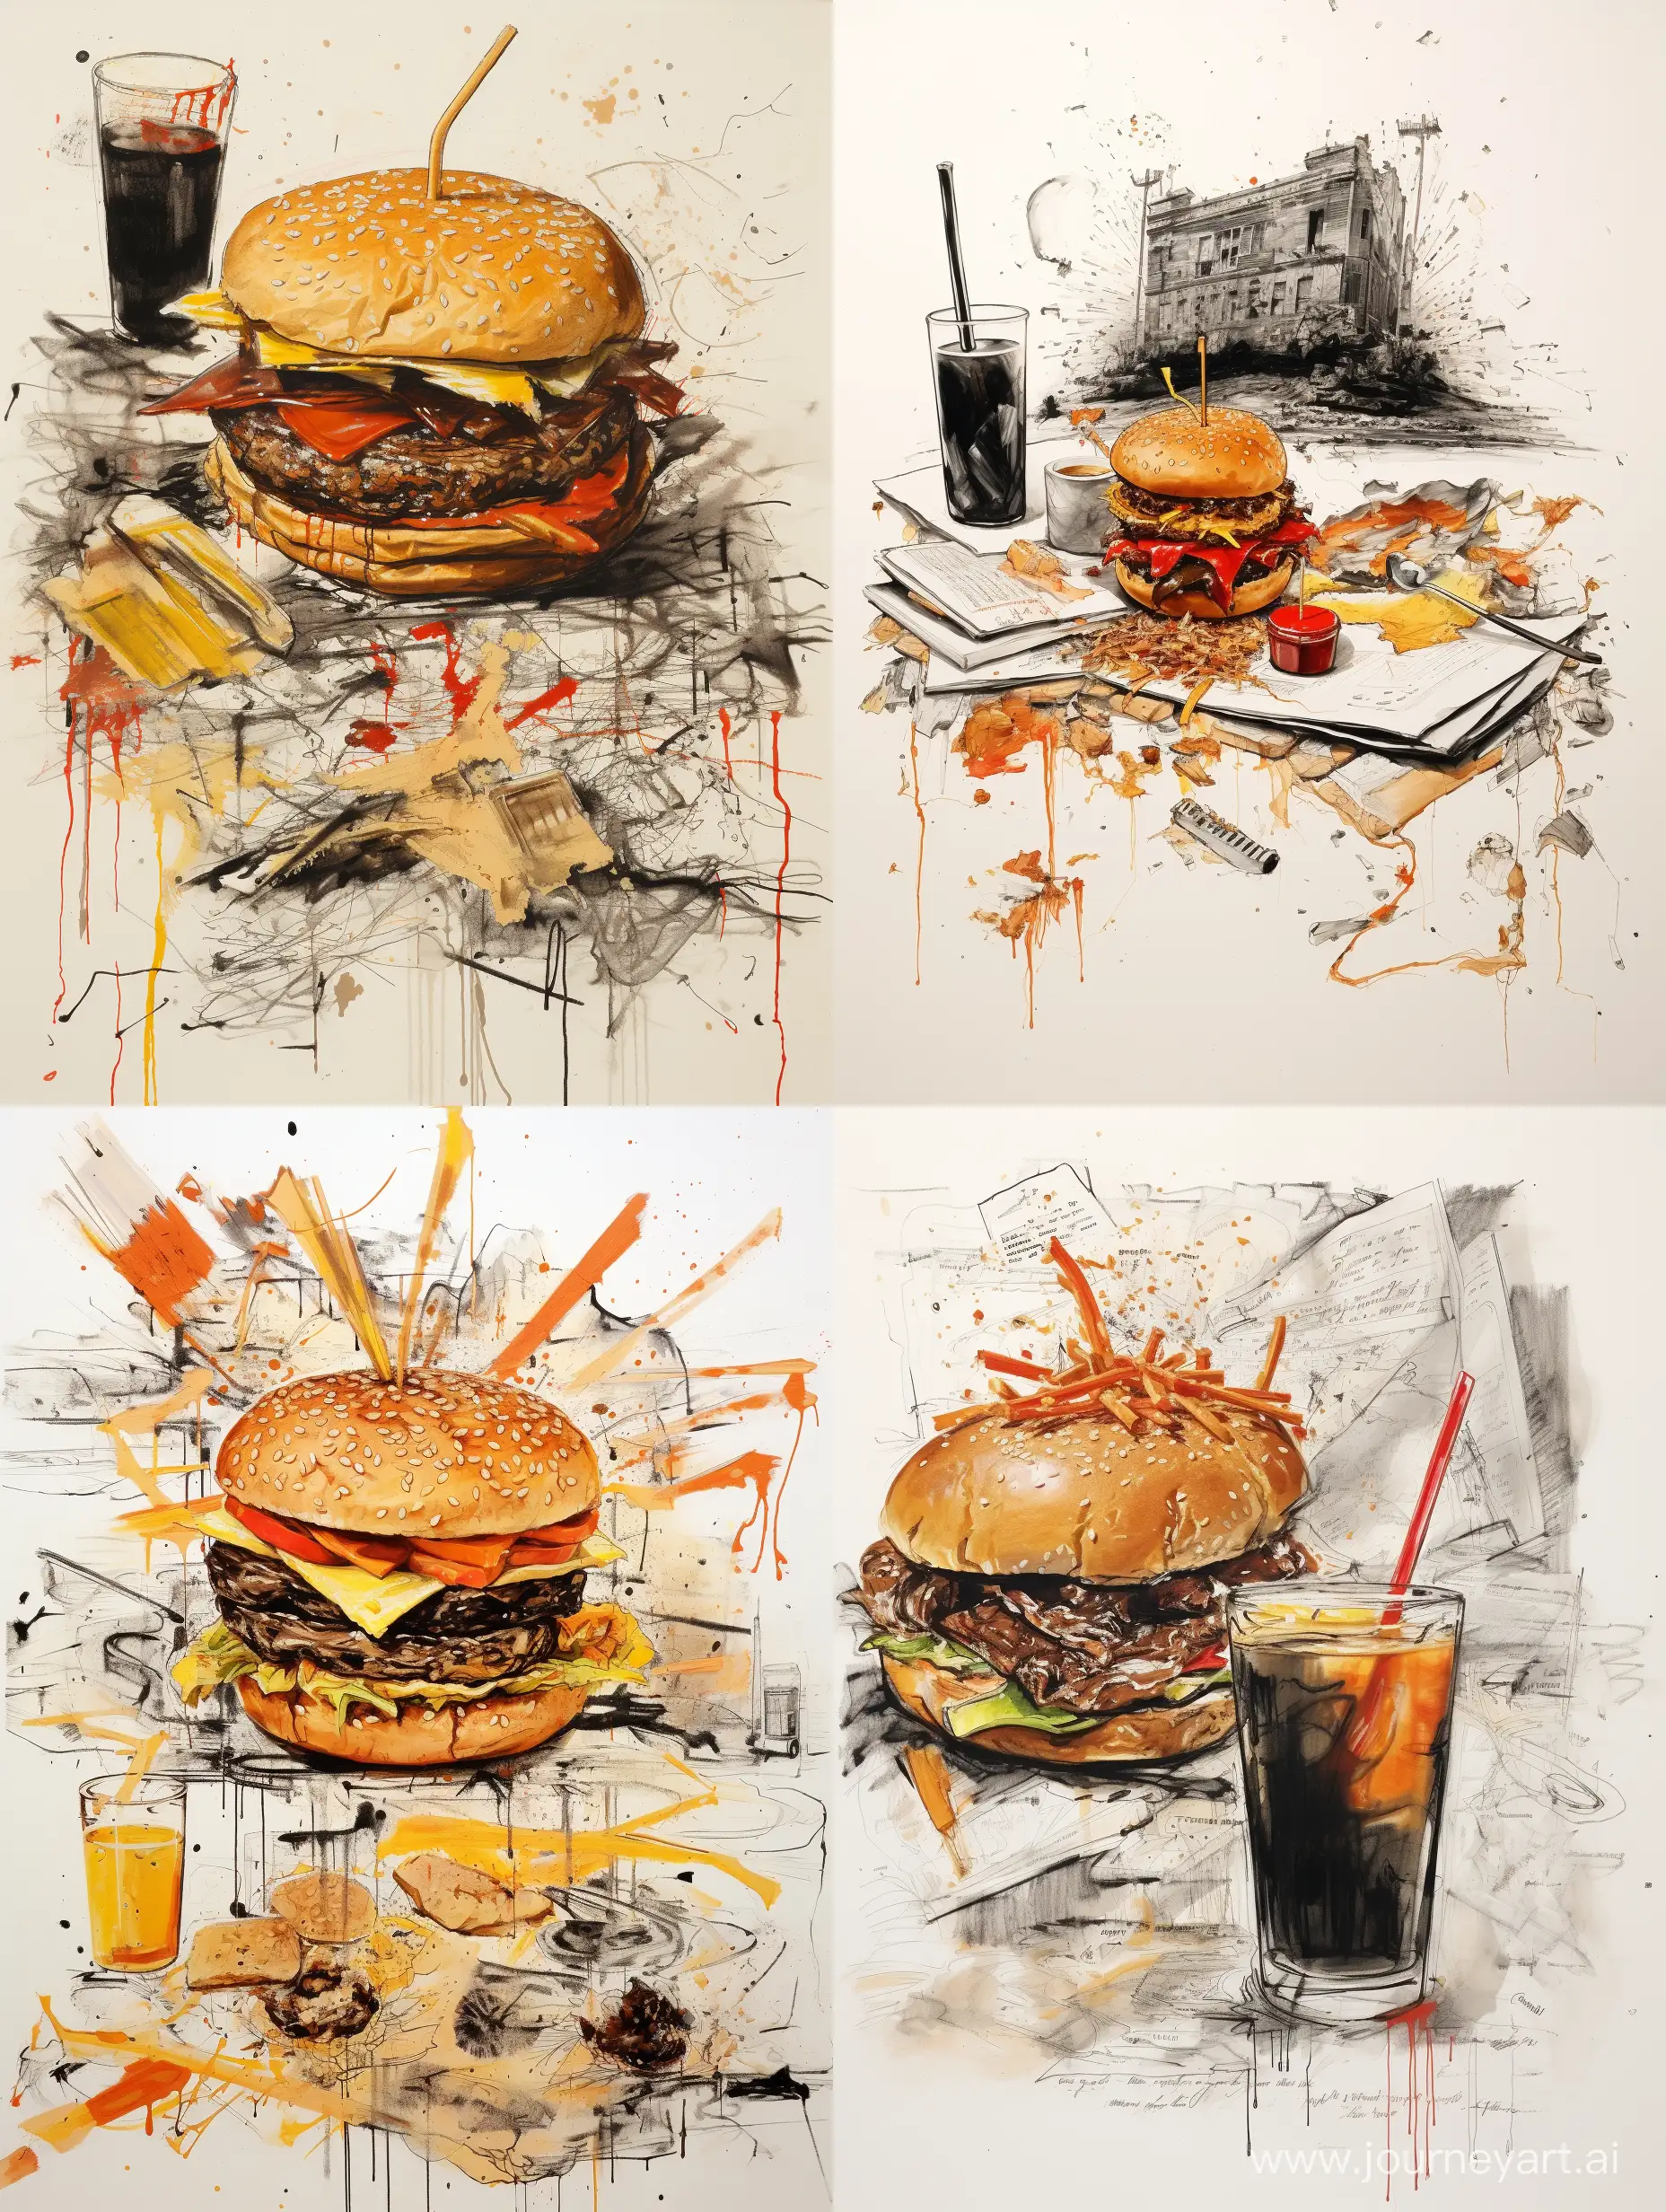 half of a burger, one whiskey tumbler, pages of a manuscript, cigarettes, ashes, mustard spilled, ketchup smeared, potato fries::1 on a side, view from above, no background, Ralph Steadman's style in ink, erratic, --no faces, bottles, wine